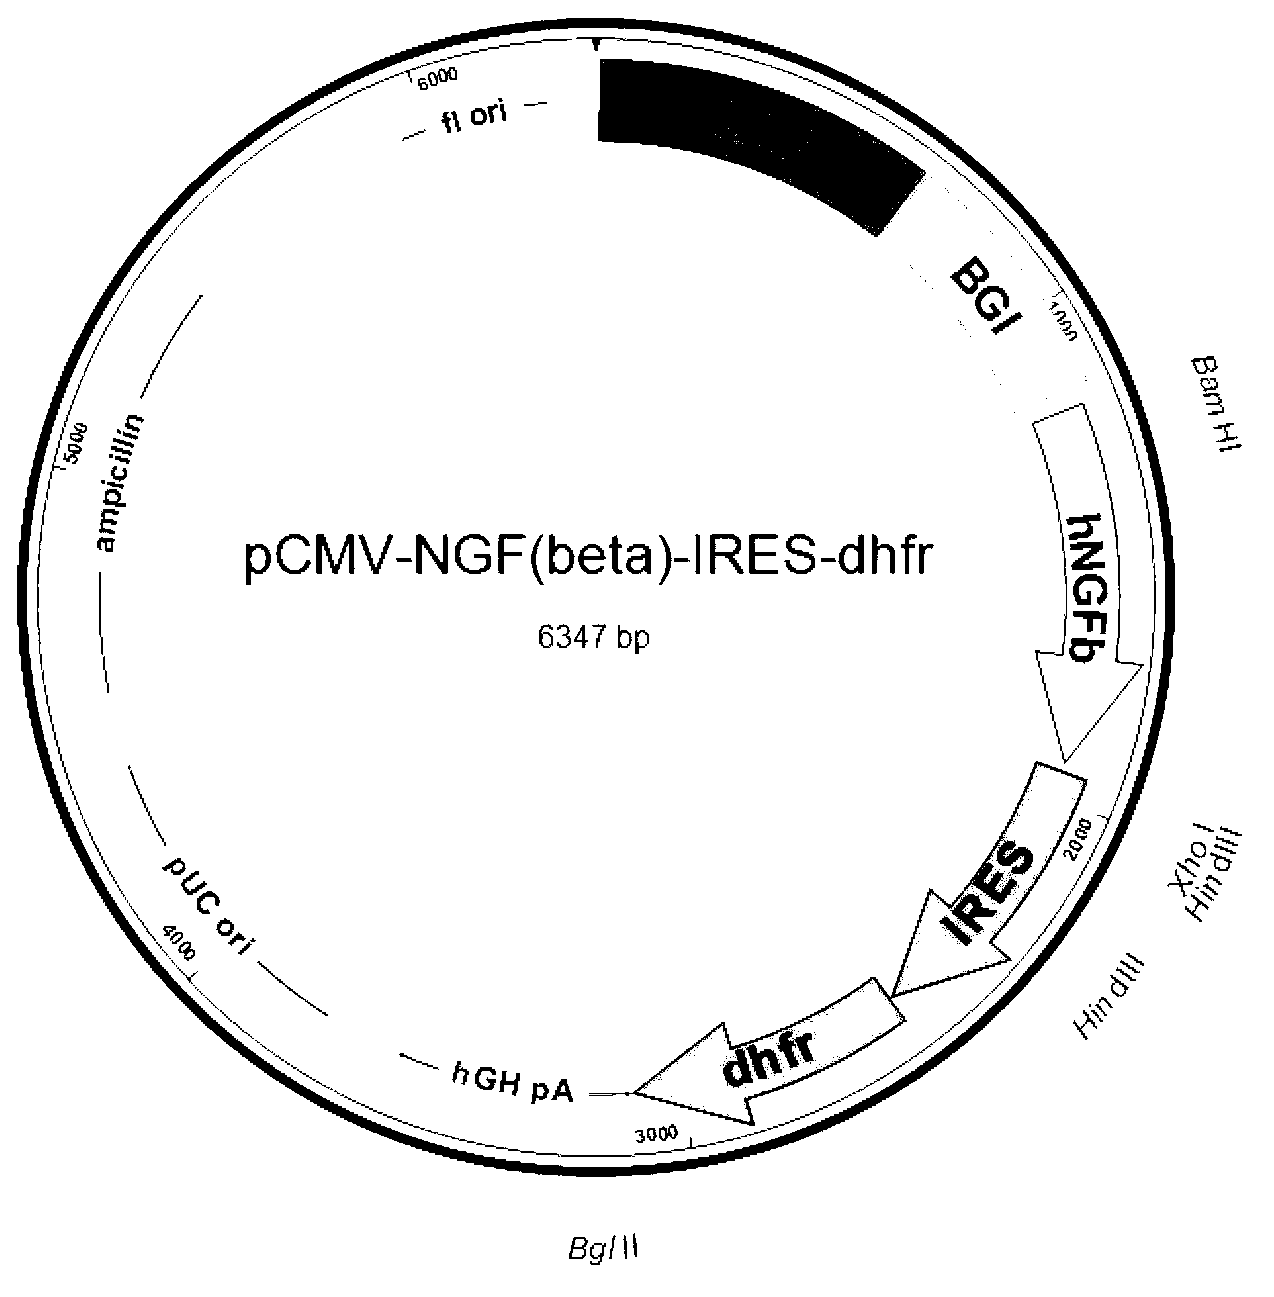 Recombinant expression vector for human beta-NGF and recombinant cell strain containing same